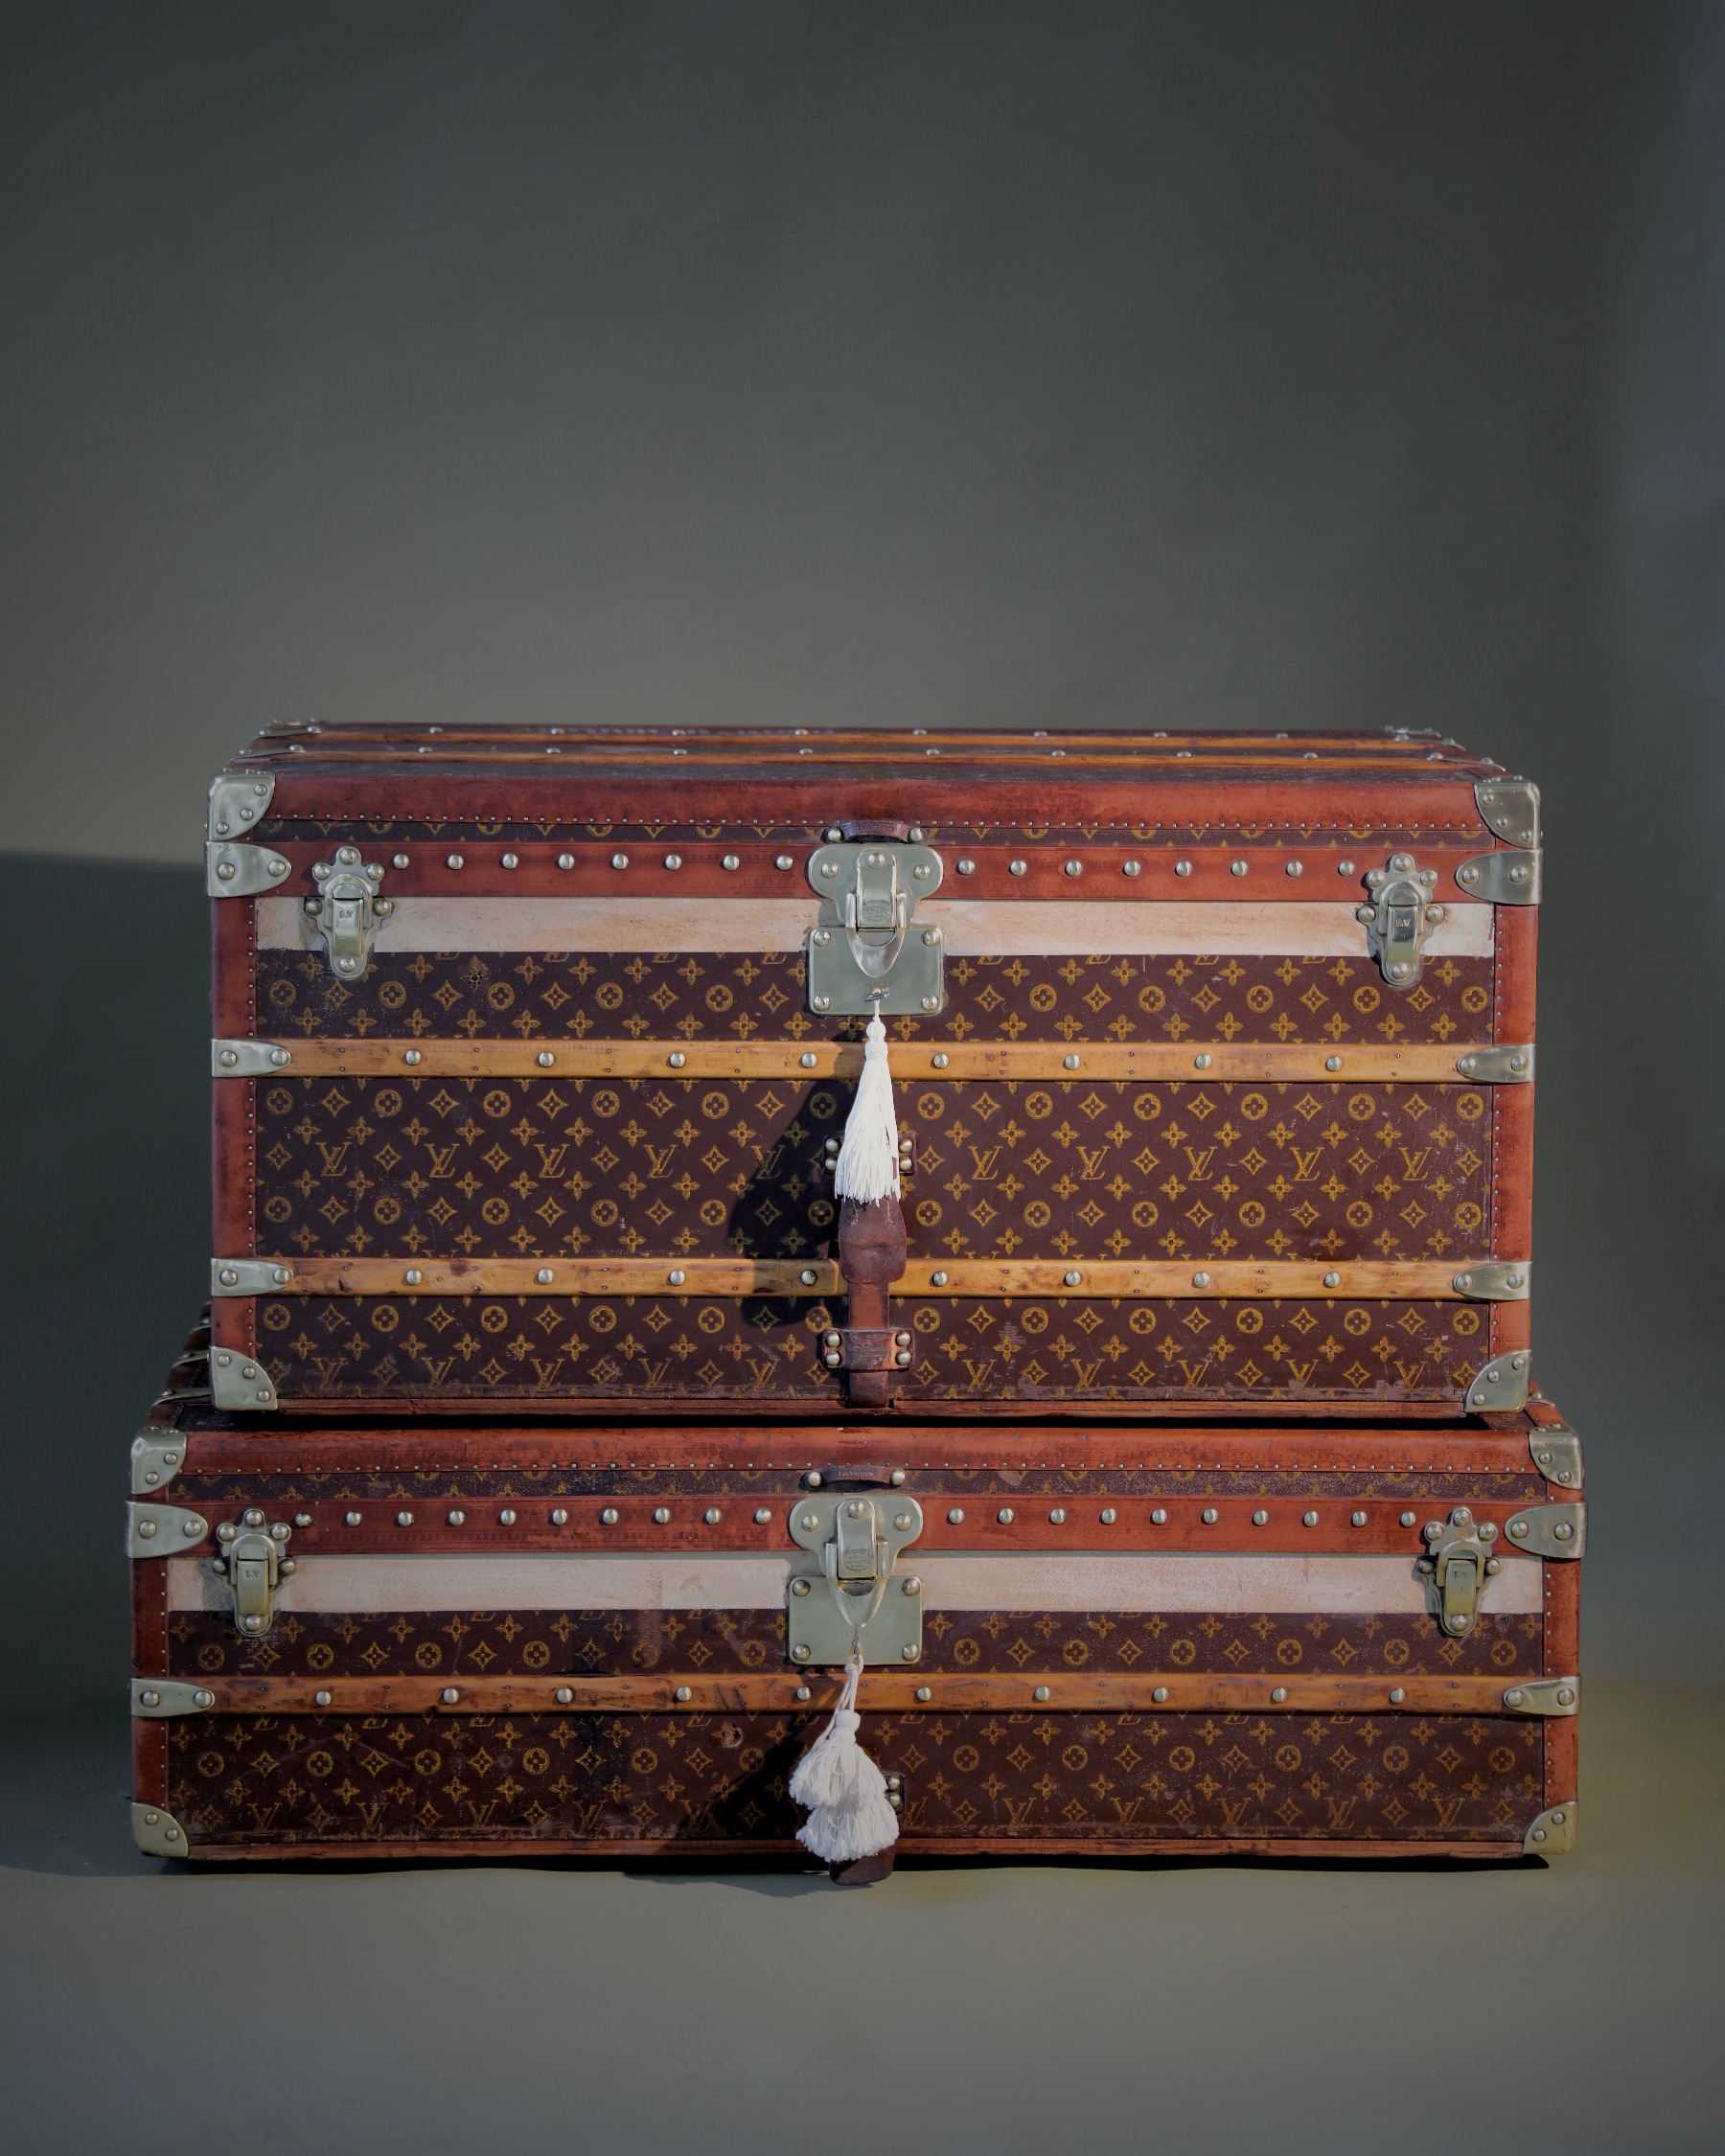 he-well-traveled-trunk-louis-vuitton-thumbnail-product-5769:70-1